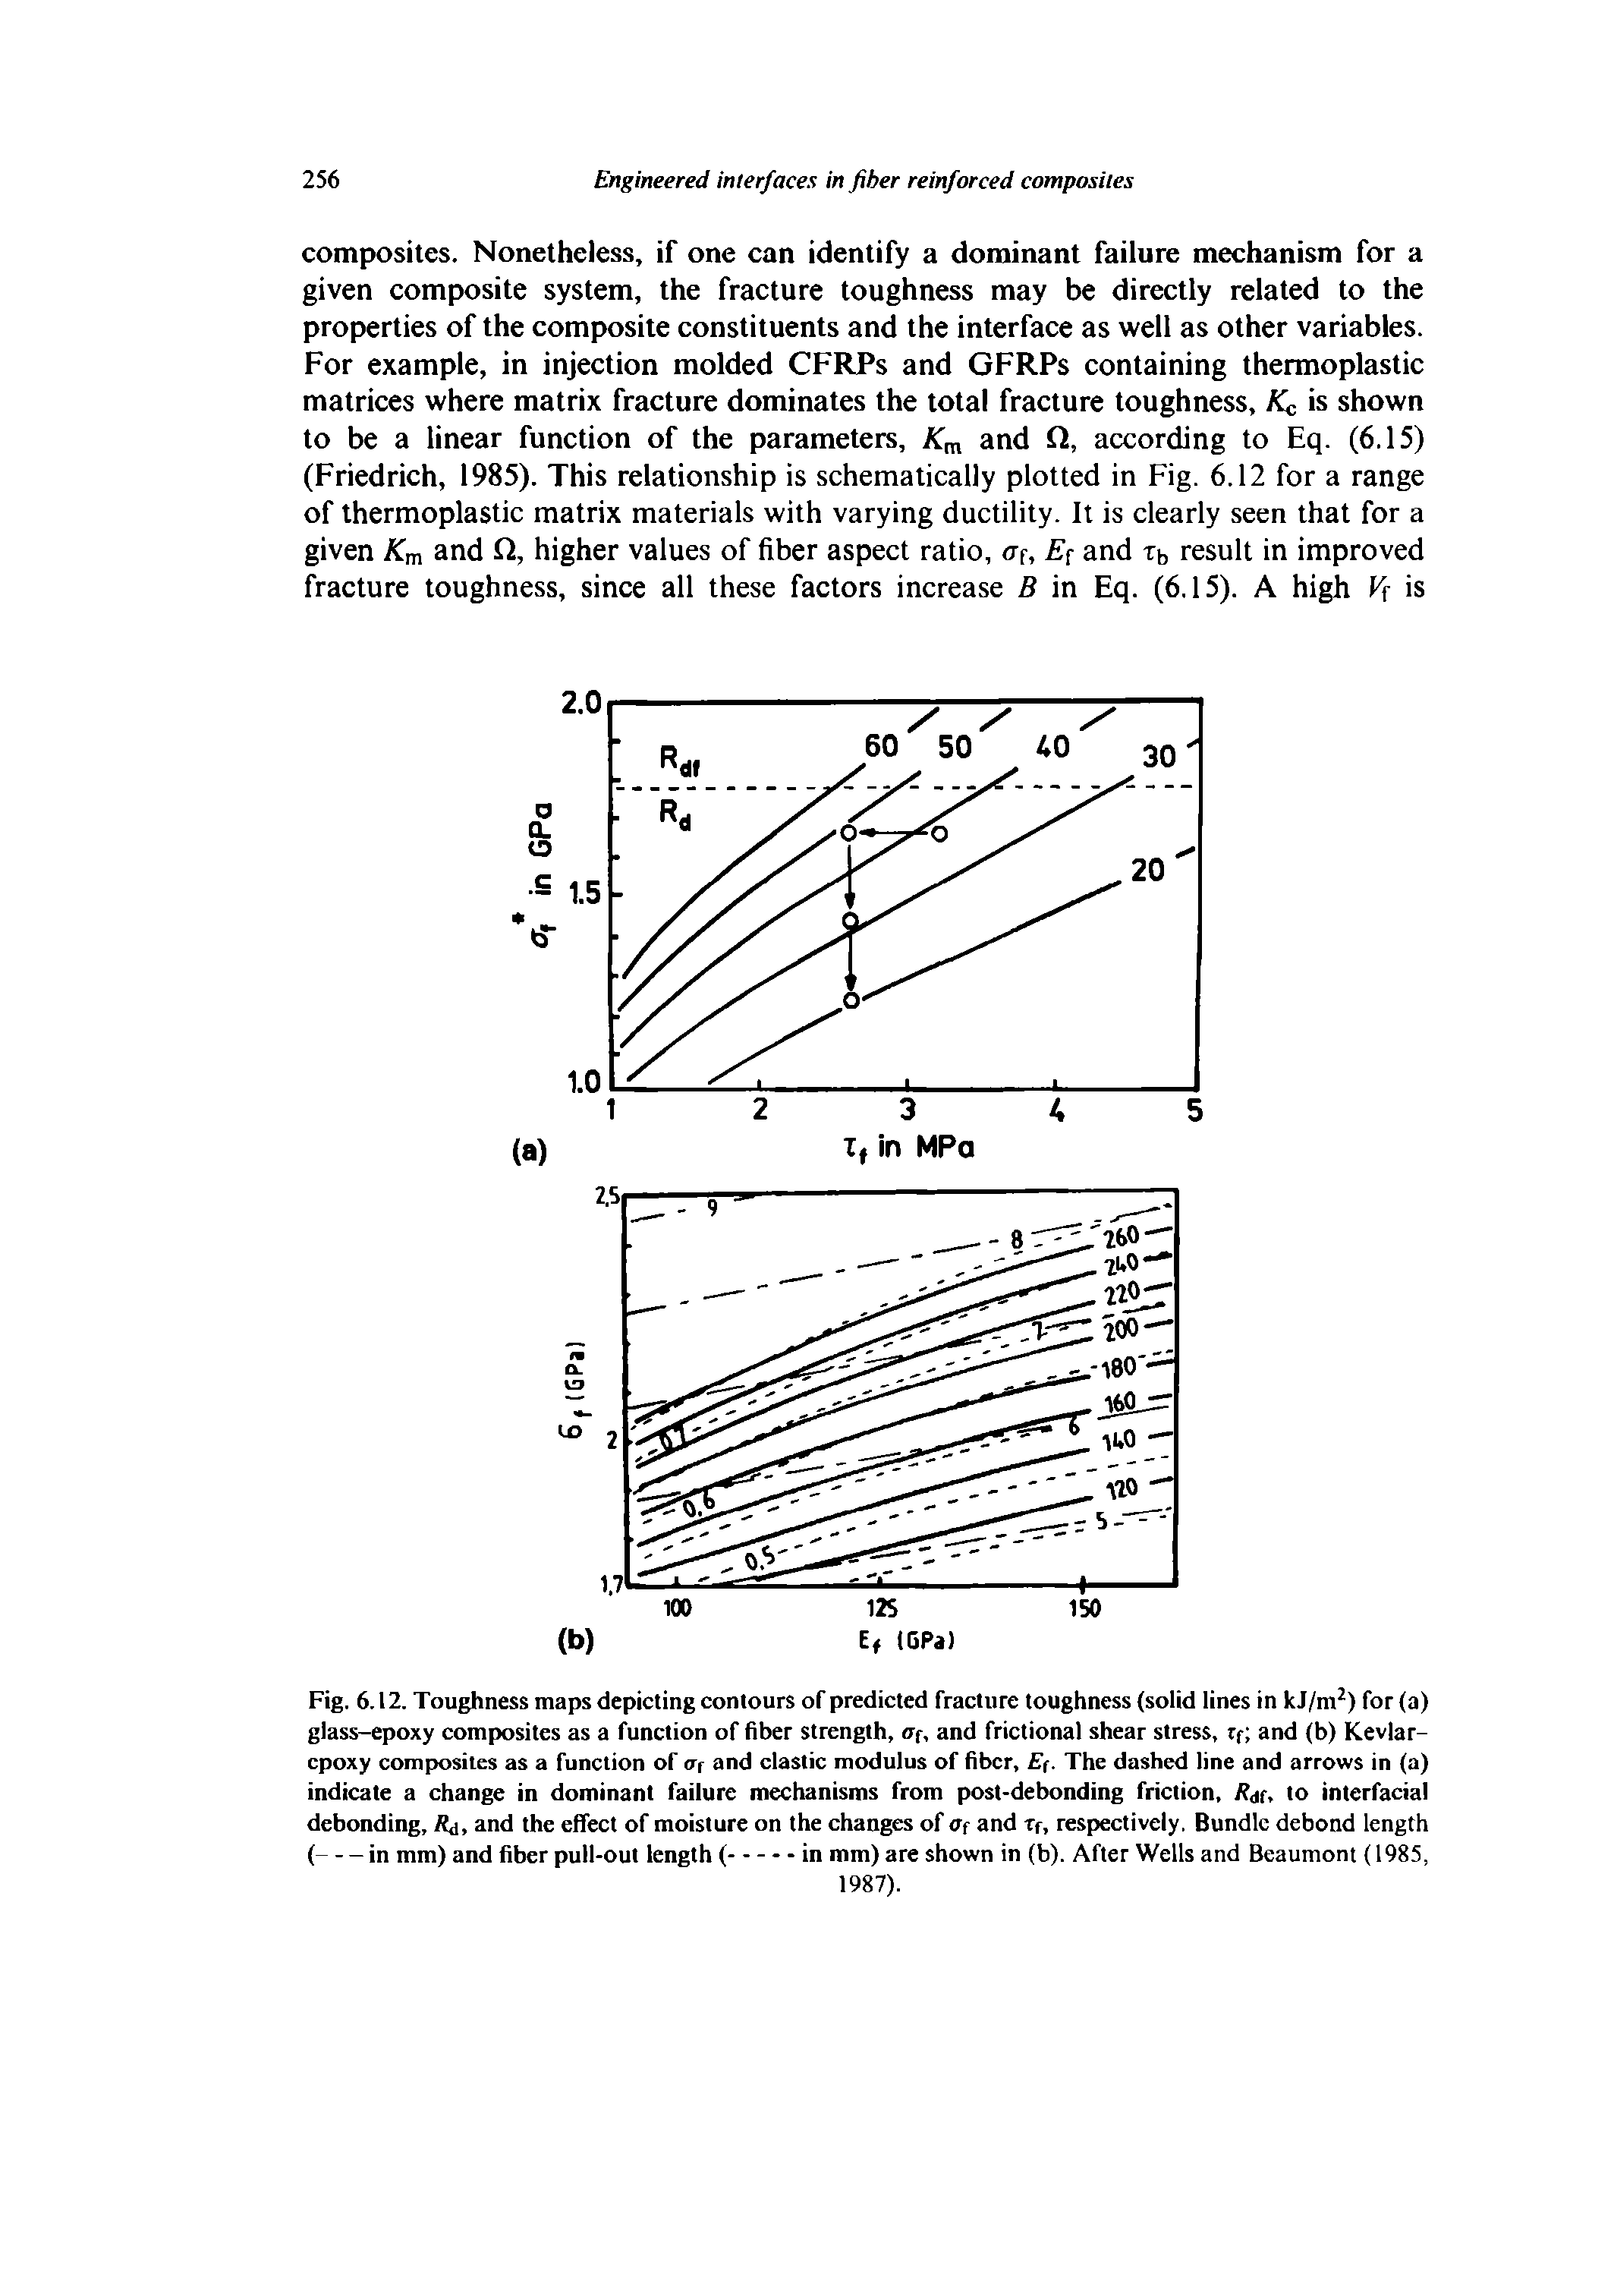 Fig. 6.12. Toughness maps depicting contours of predicted fracture toughness (solid lines in kJ/m ) for (a) glass-epoxy composites as a function of fiber strength, Uf, and frictional shear stress, tf and (b) Kevlar-cpoxy composites as a function of at and clastic modulus of fiber, Ef. The dashed line and arrows in (a) indicate a change in dominant failure mechanisms from post-debonding friction, Rif, to interfacial debonding, Sj, and the effect of moisture on the changes of Of and Tf, respectively. Bundle debond length...